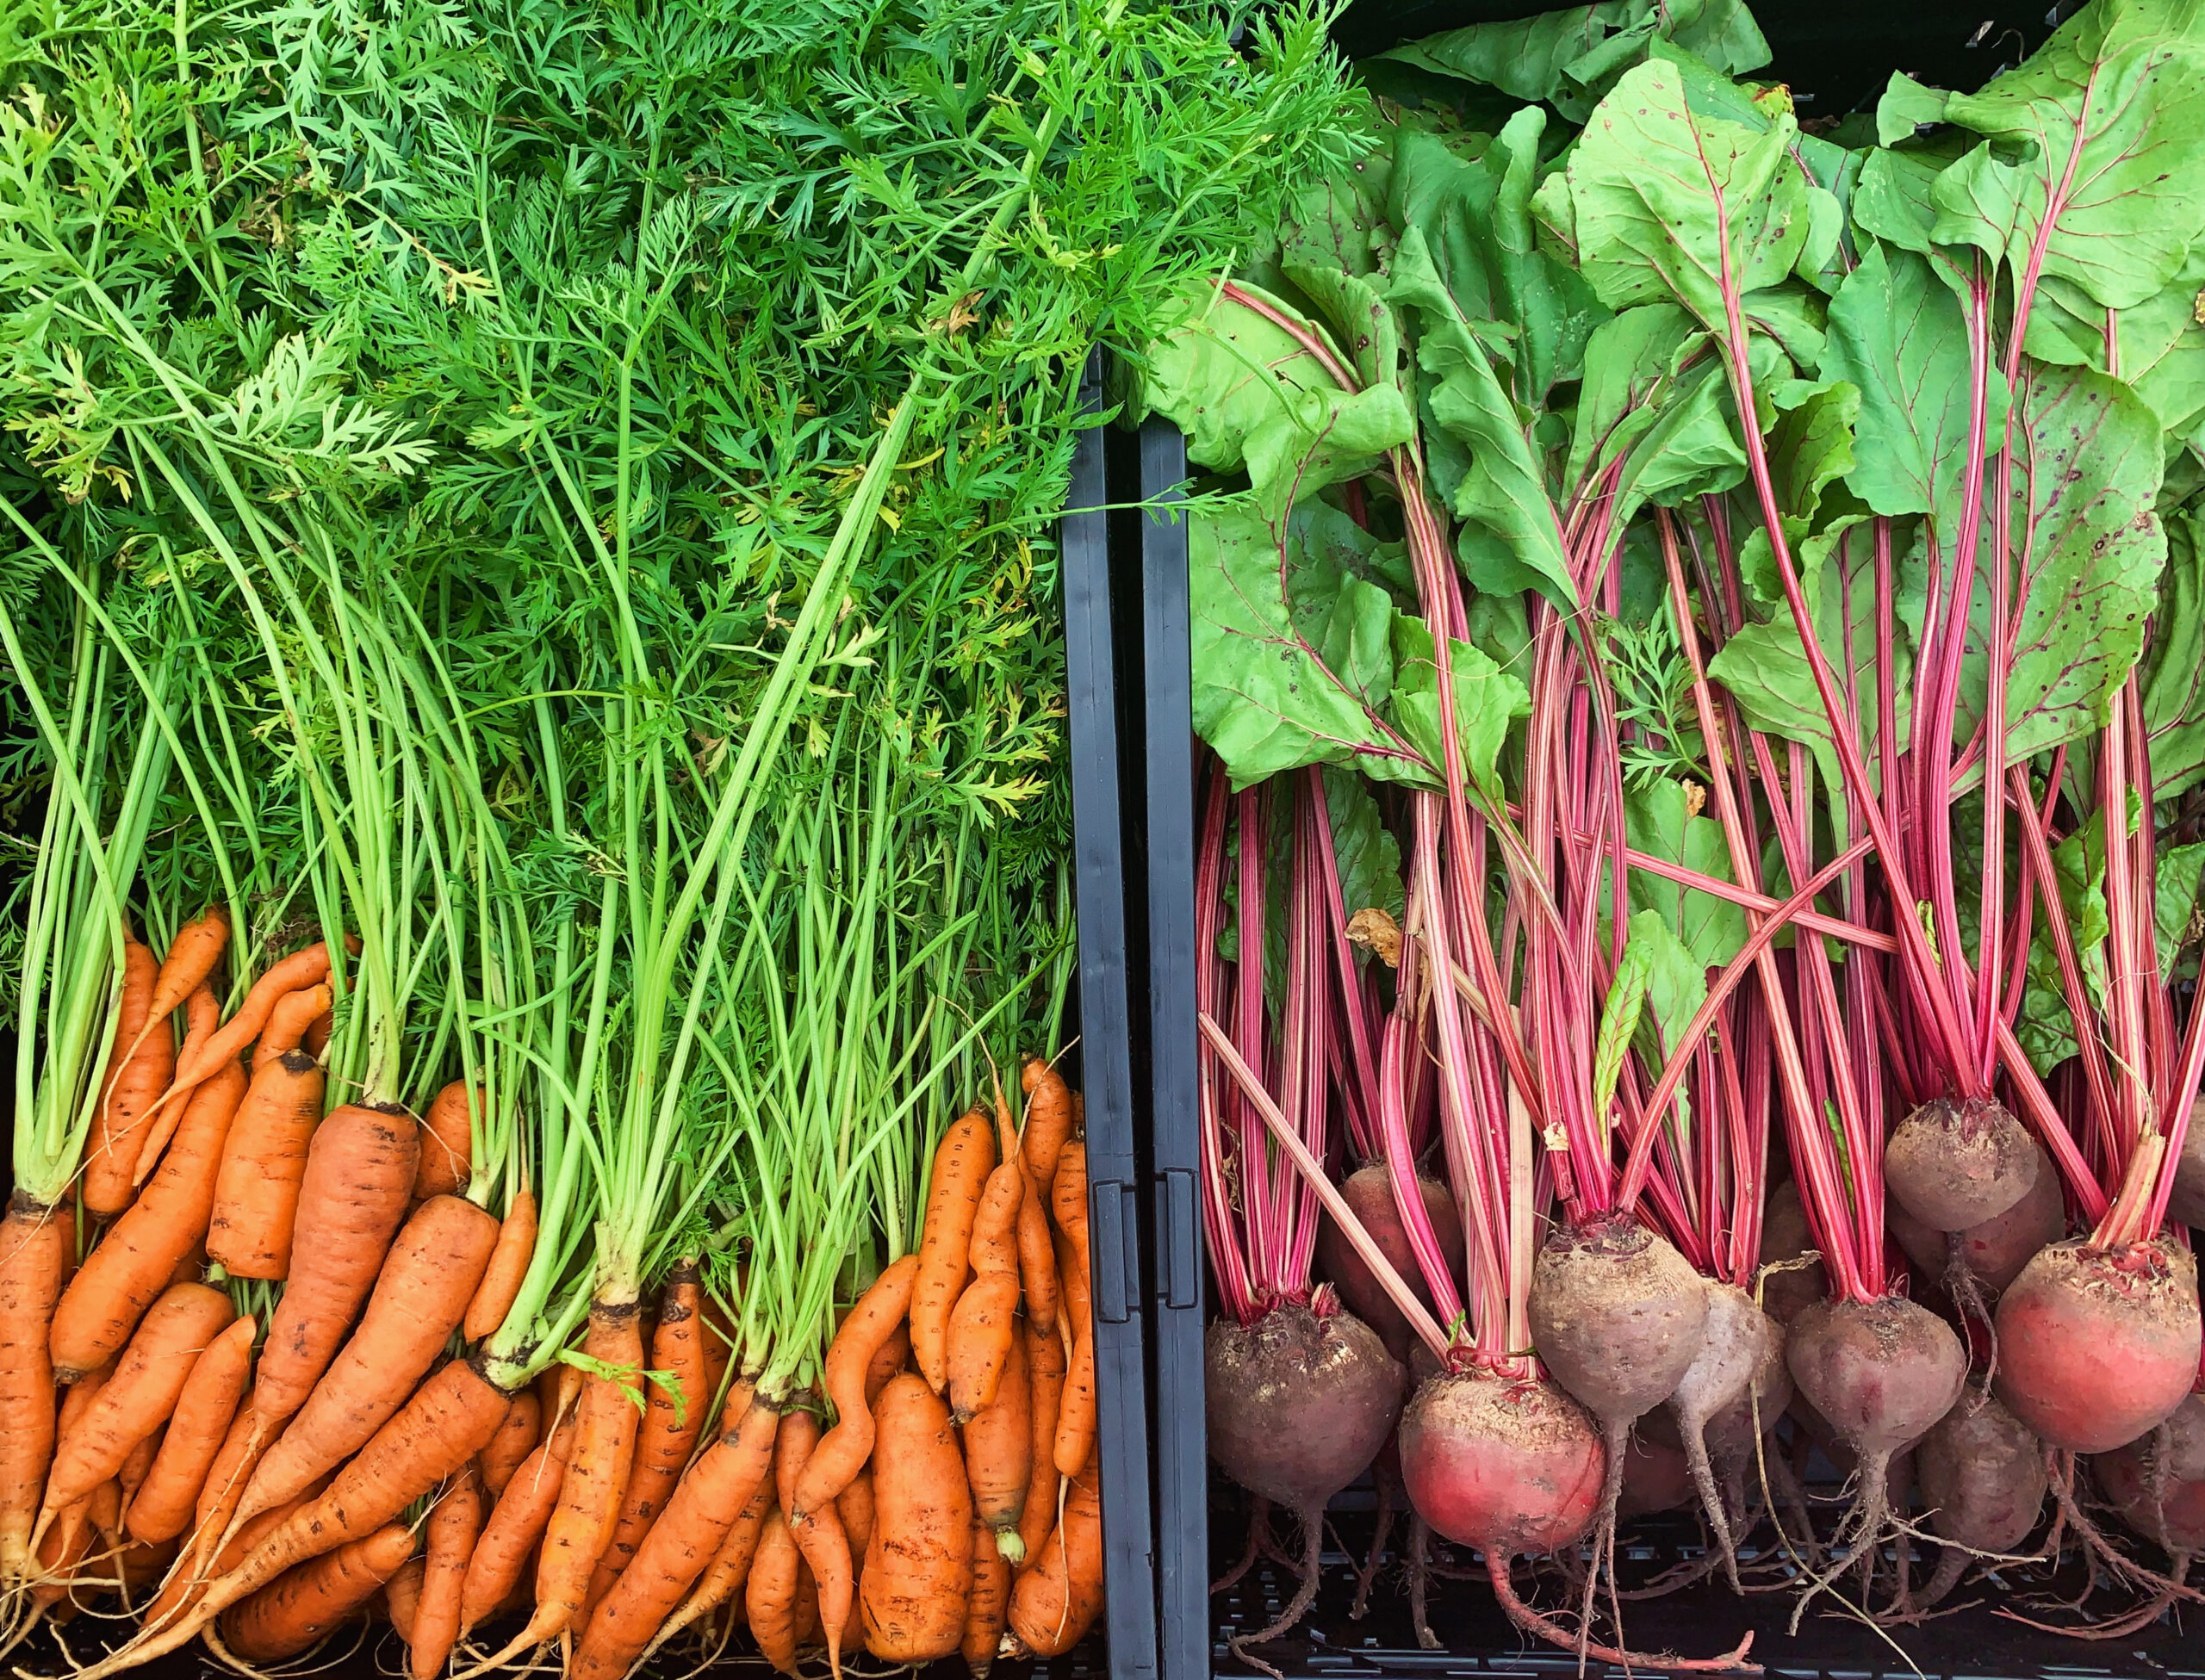 Crown Garden's carrots and beets